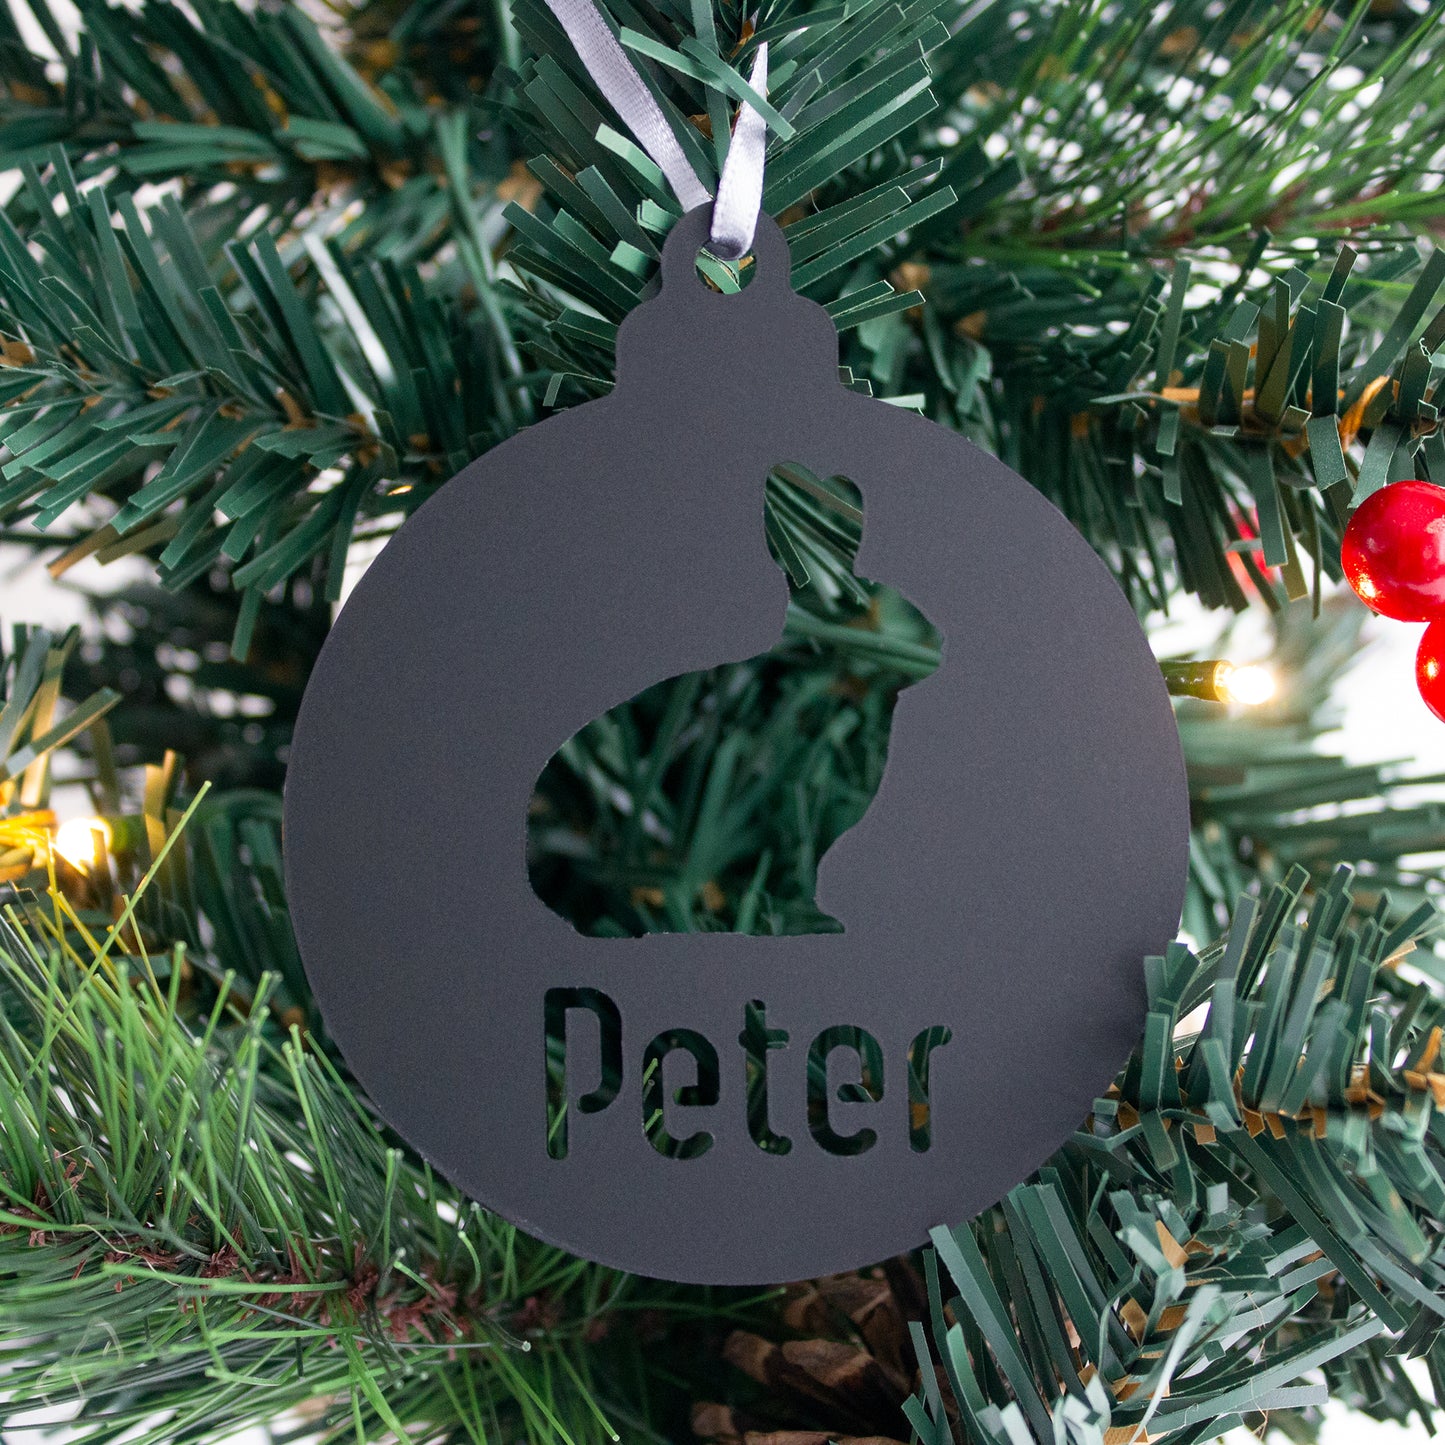 Personalised Rabbit Bauble, Bunny Gifts, Pet Stocking Fillers